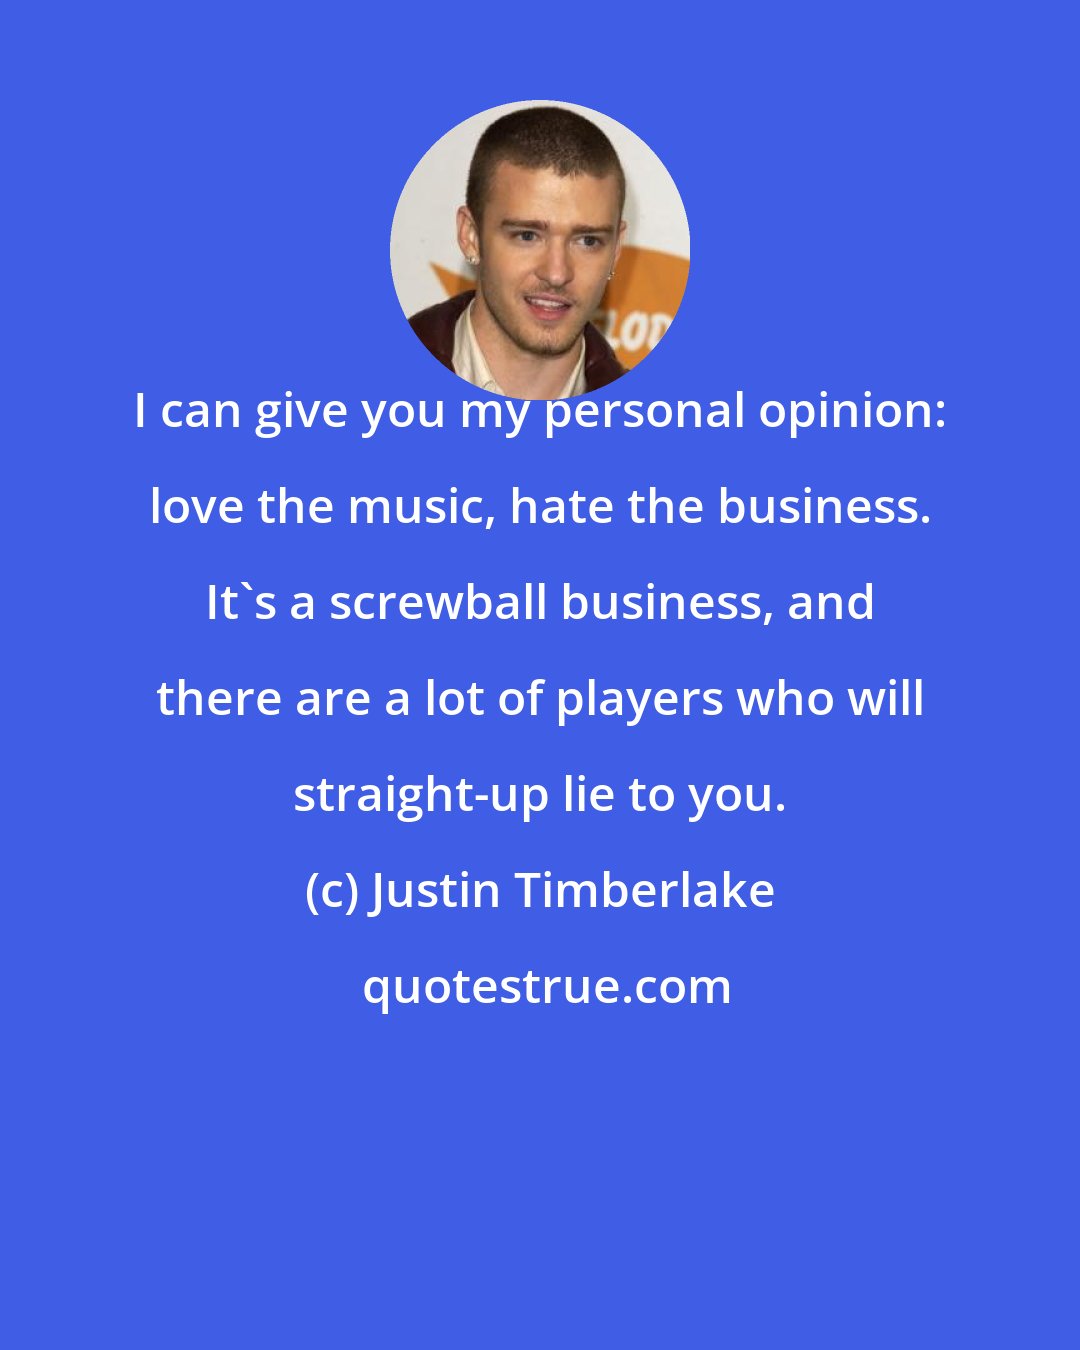 Justin Timberlake: I can give you my personal opinion: love the music, hate the business. It's a screwball business, and there are a lot of players who will straight-up lie to you.